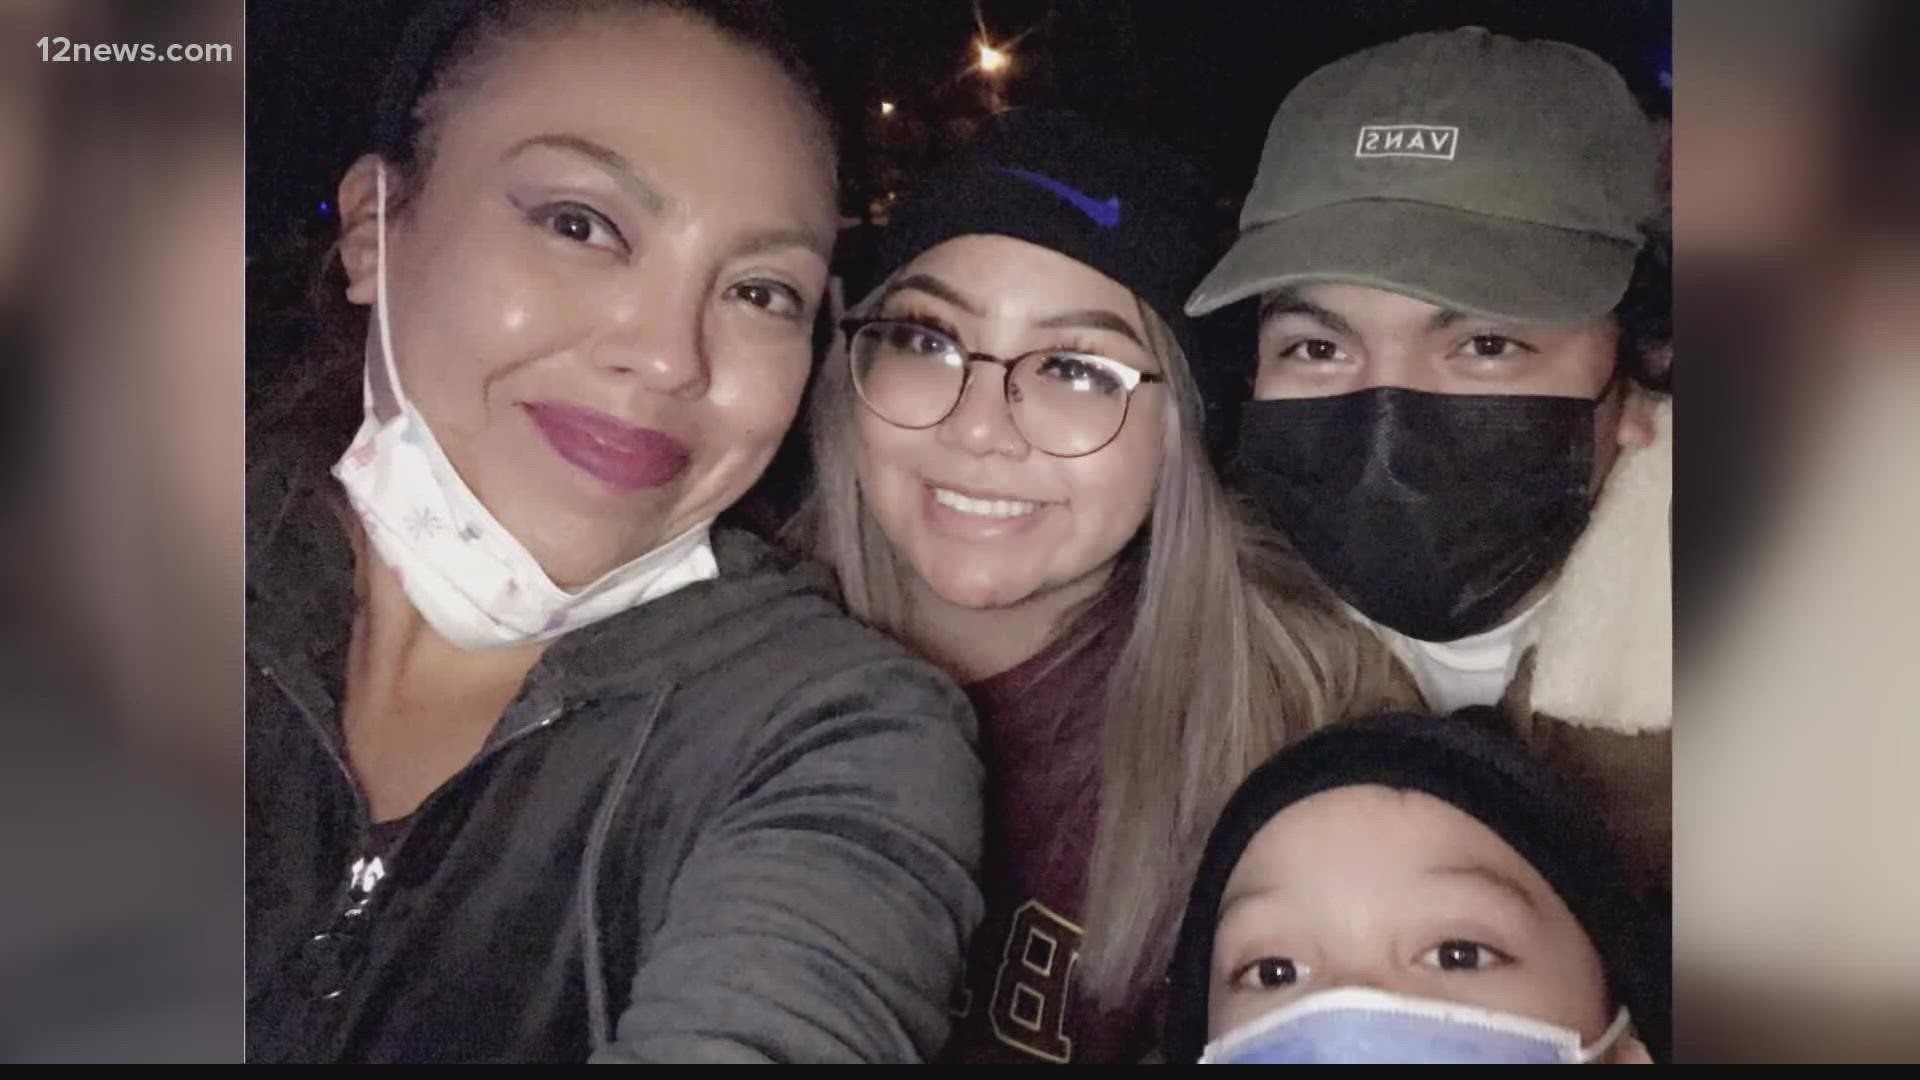 An Arizona mom is in Mexico preparing for a life-saving surgery she couldn't get done in the U.S. because of a lack of funds. Unfortunately, her story isn't unique.